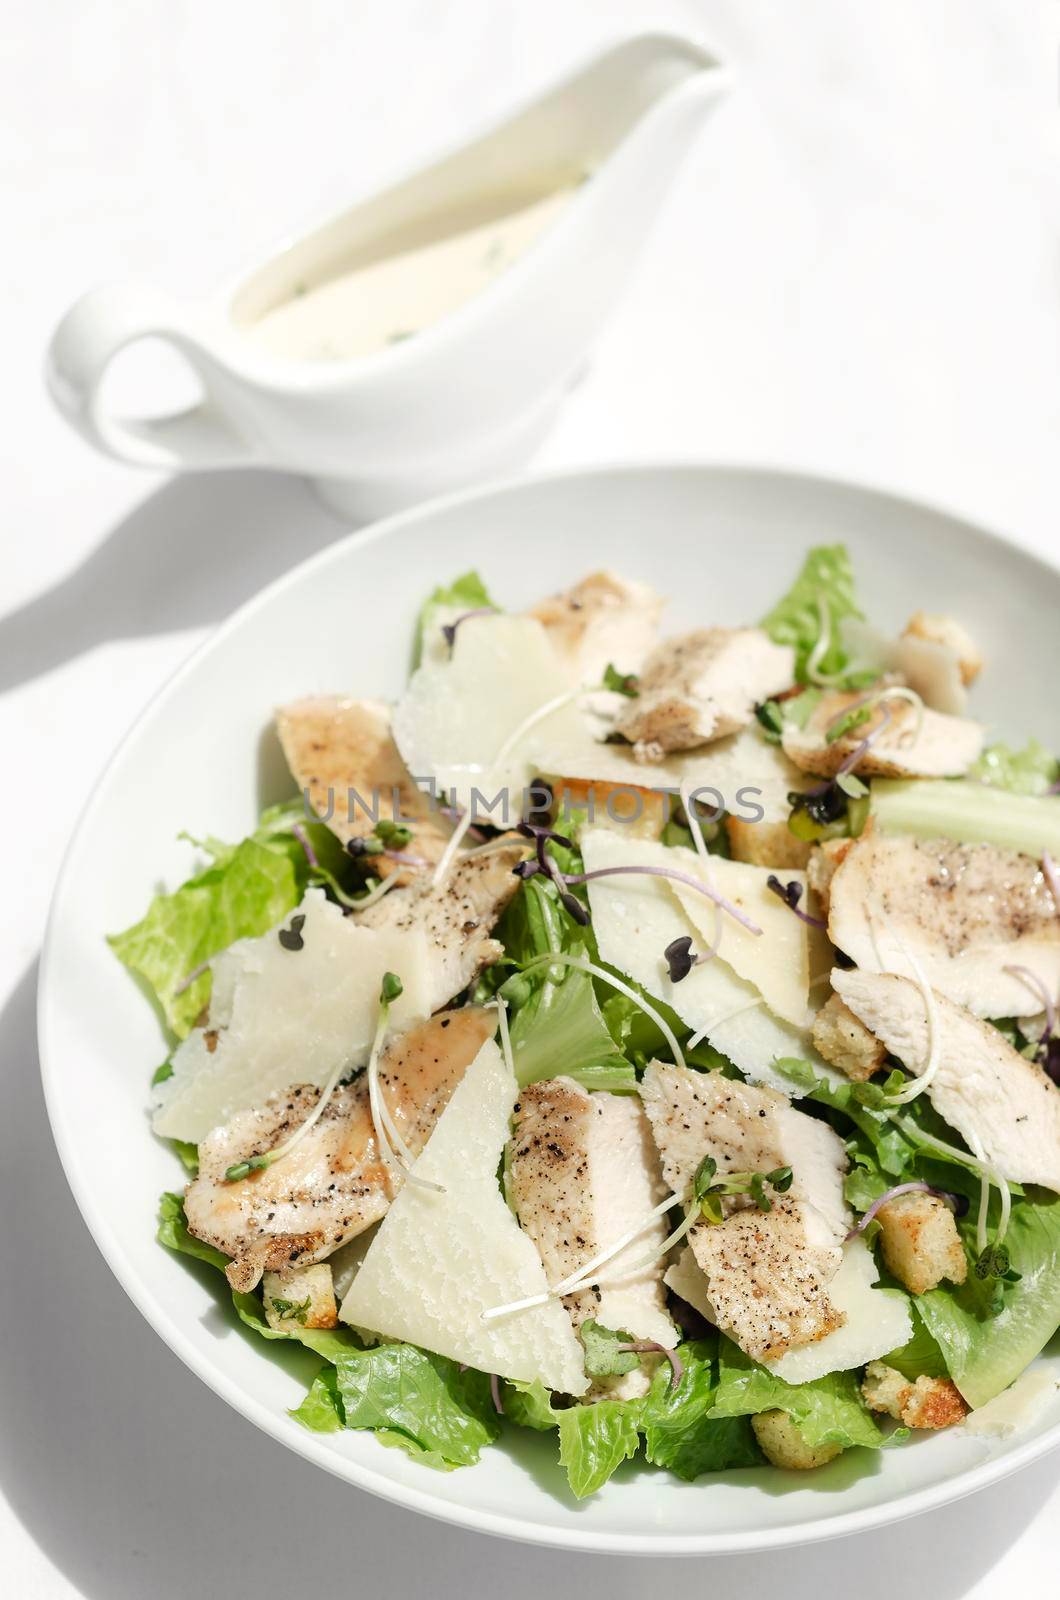 organic chicken caesar salad with parmesan cheese and croutons on white table background